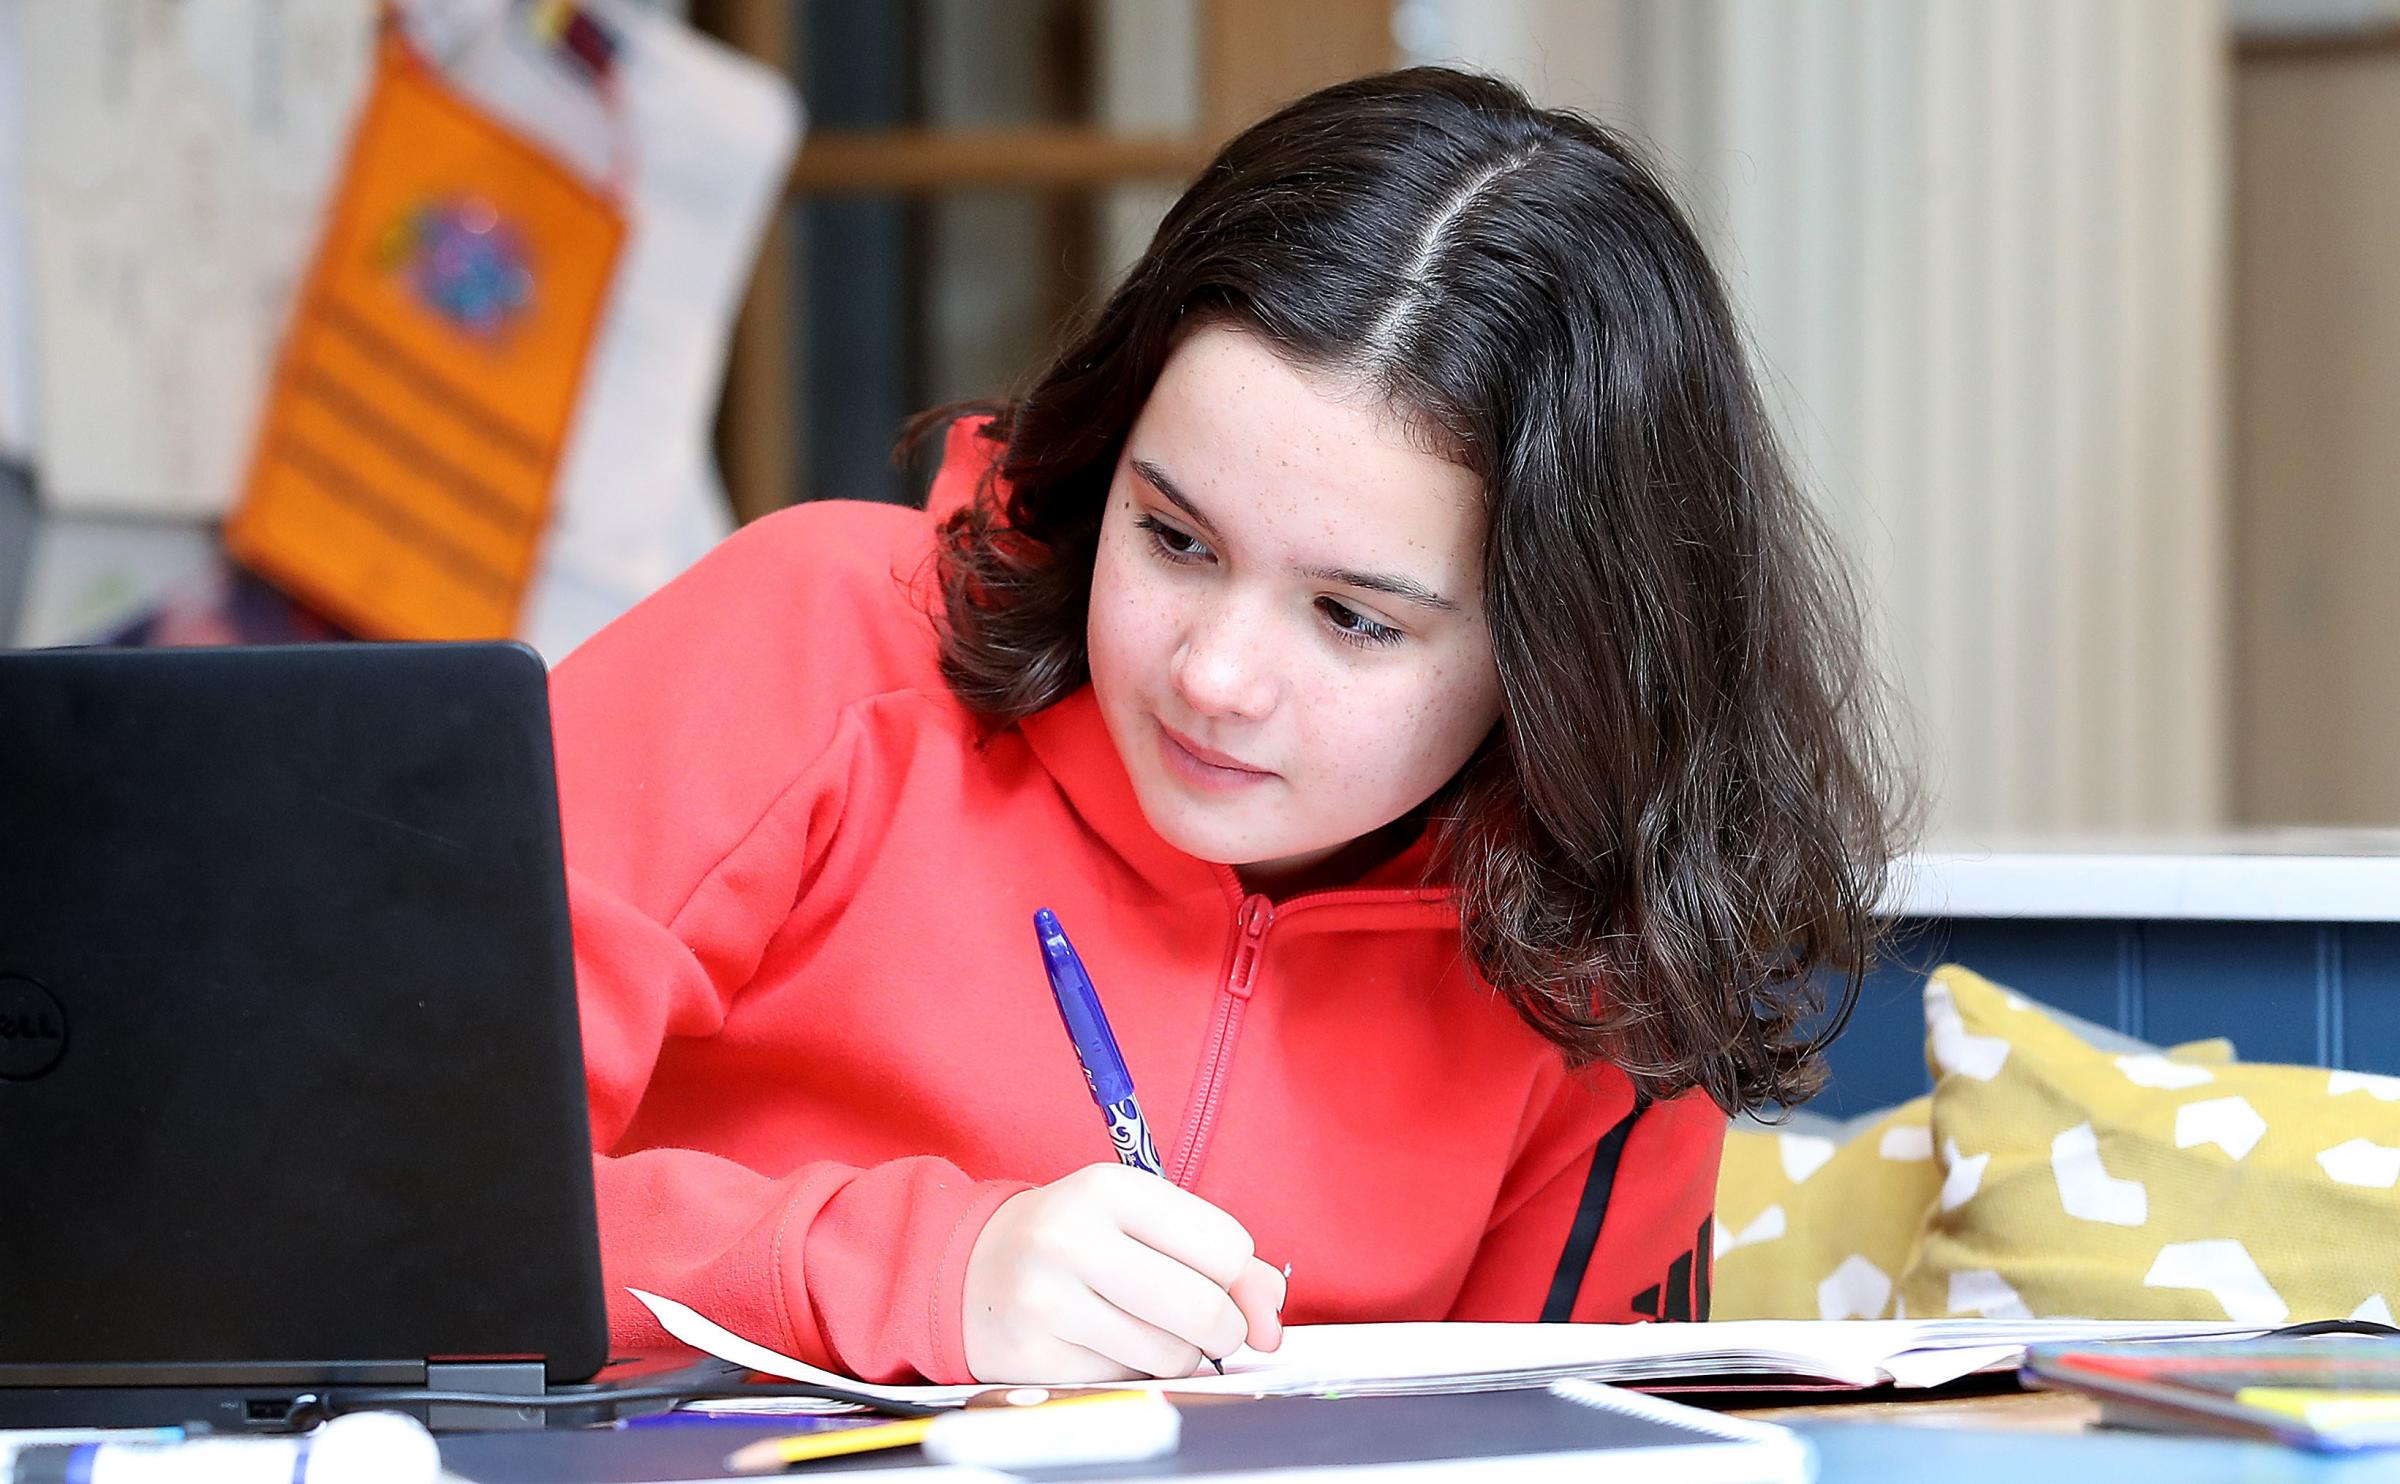 Calls for ‘disruptive’ school self-isolation to end as 1,500 Warrington pupils study at home (Image: Martin Rickett/PA Wire)